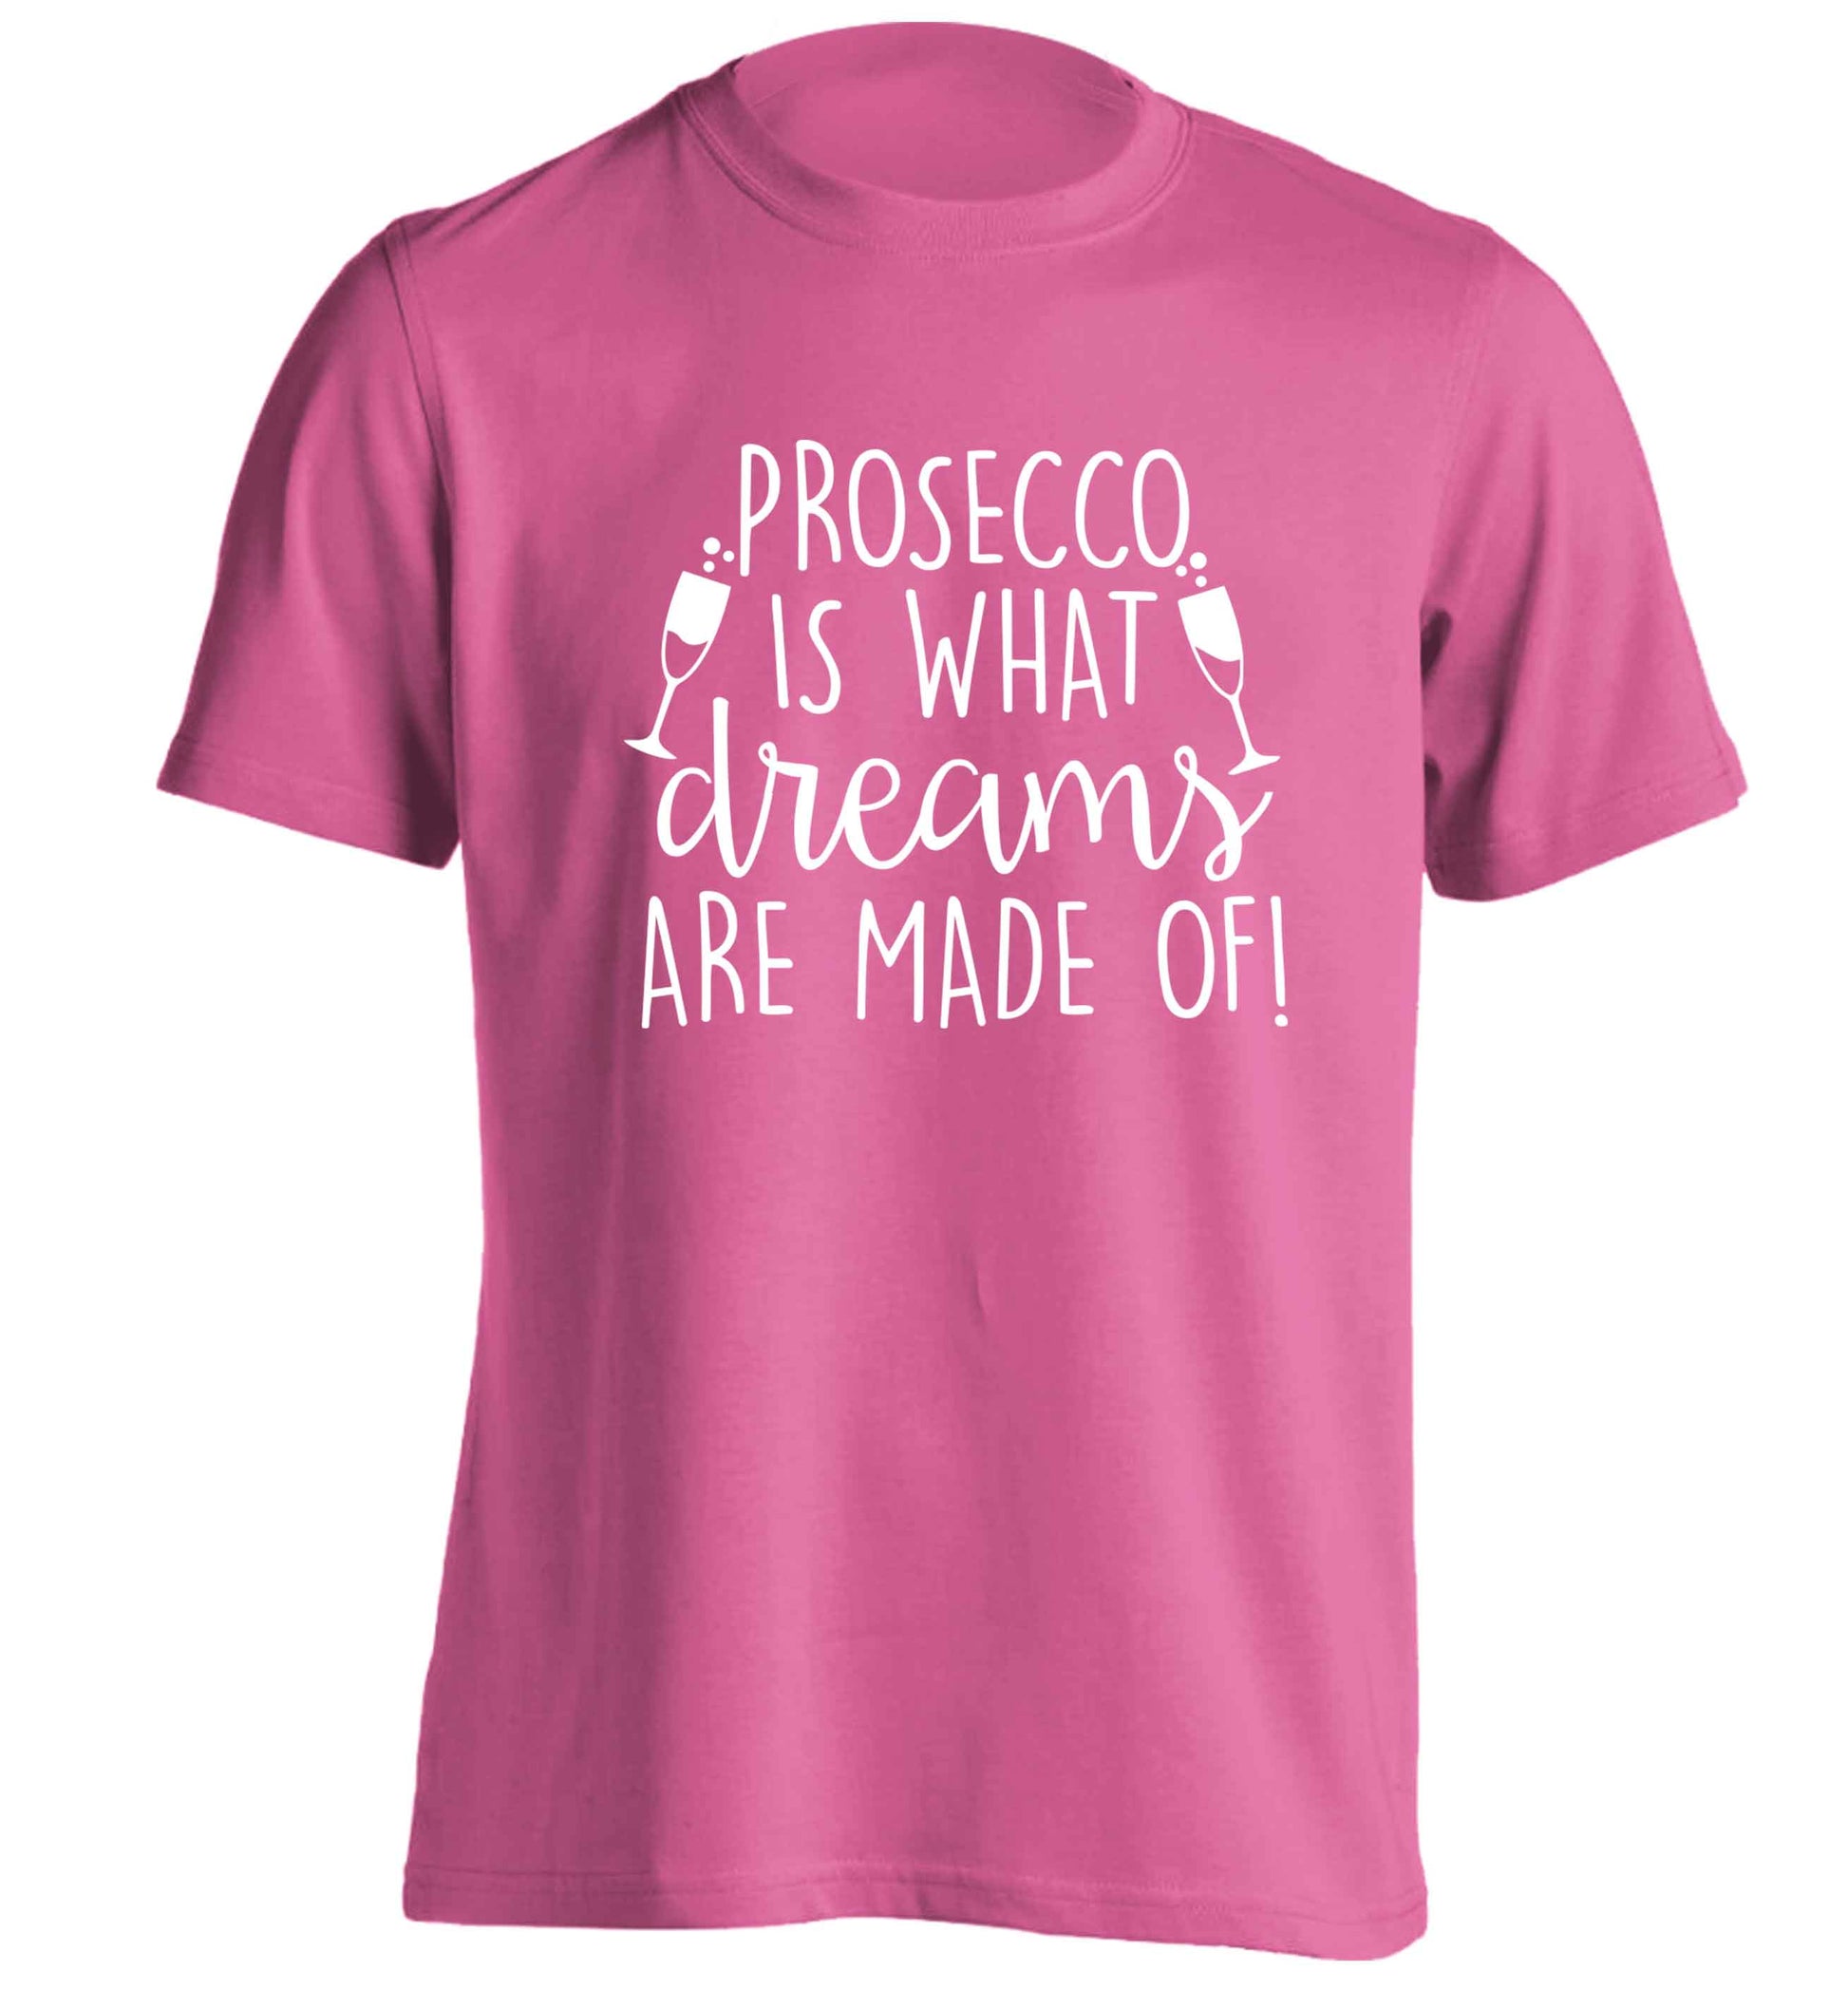 Prosecco is what dreams are made of adults unisex pink Tshirt 2XL